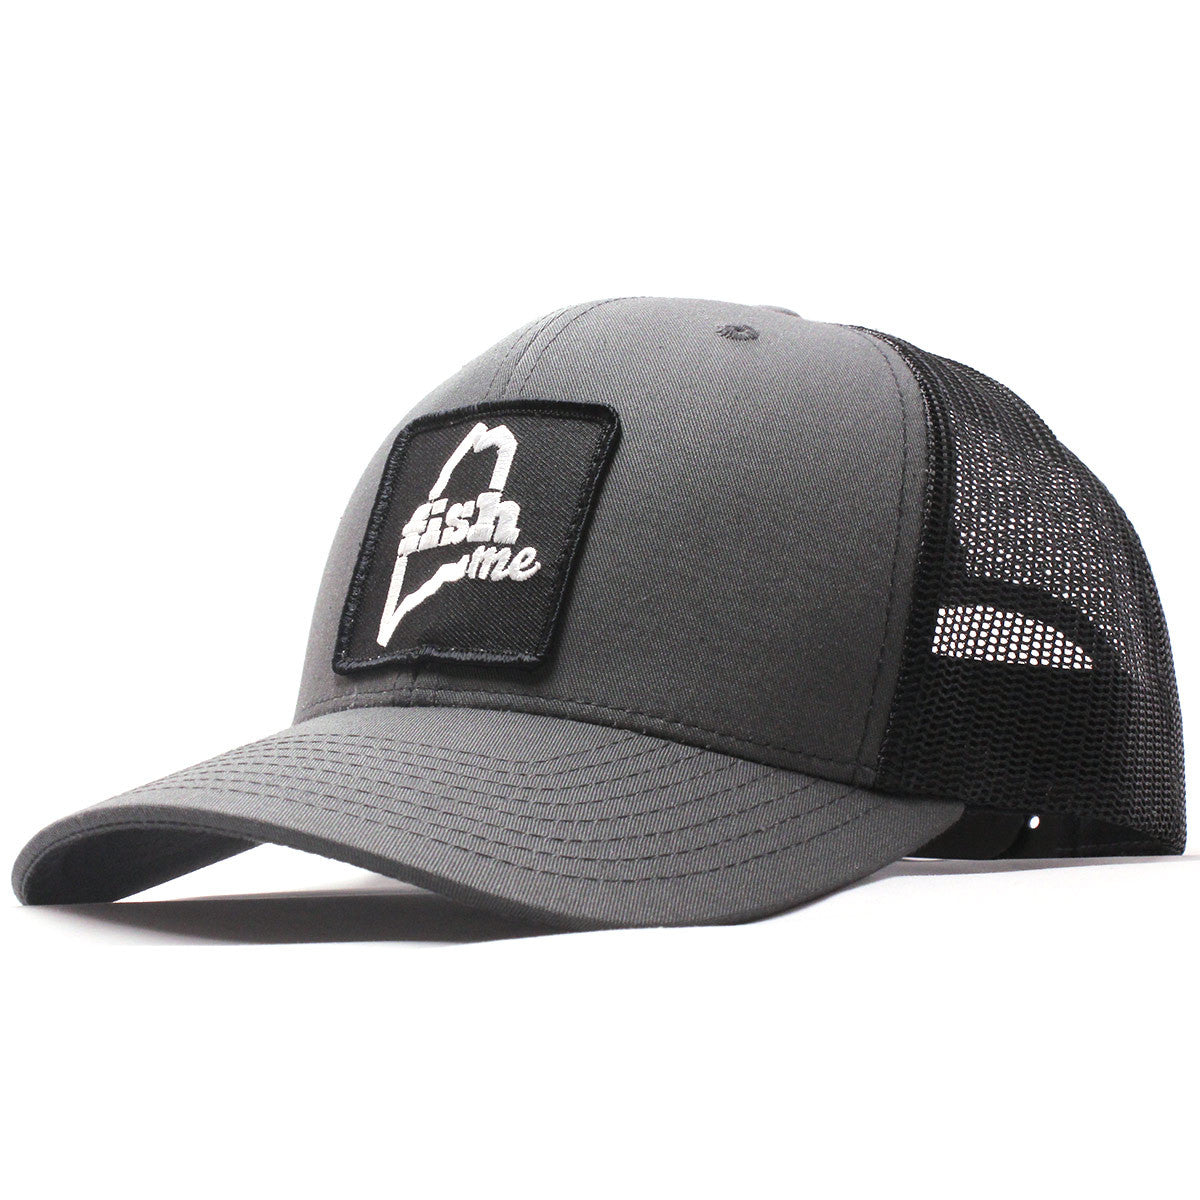 FishME Patch Trucker Hat